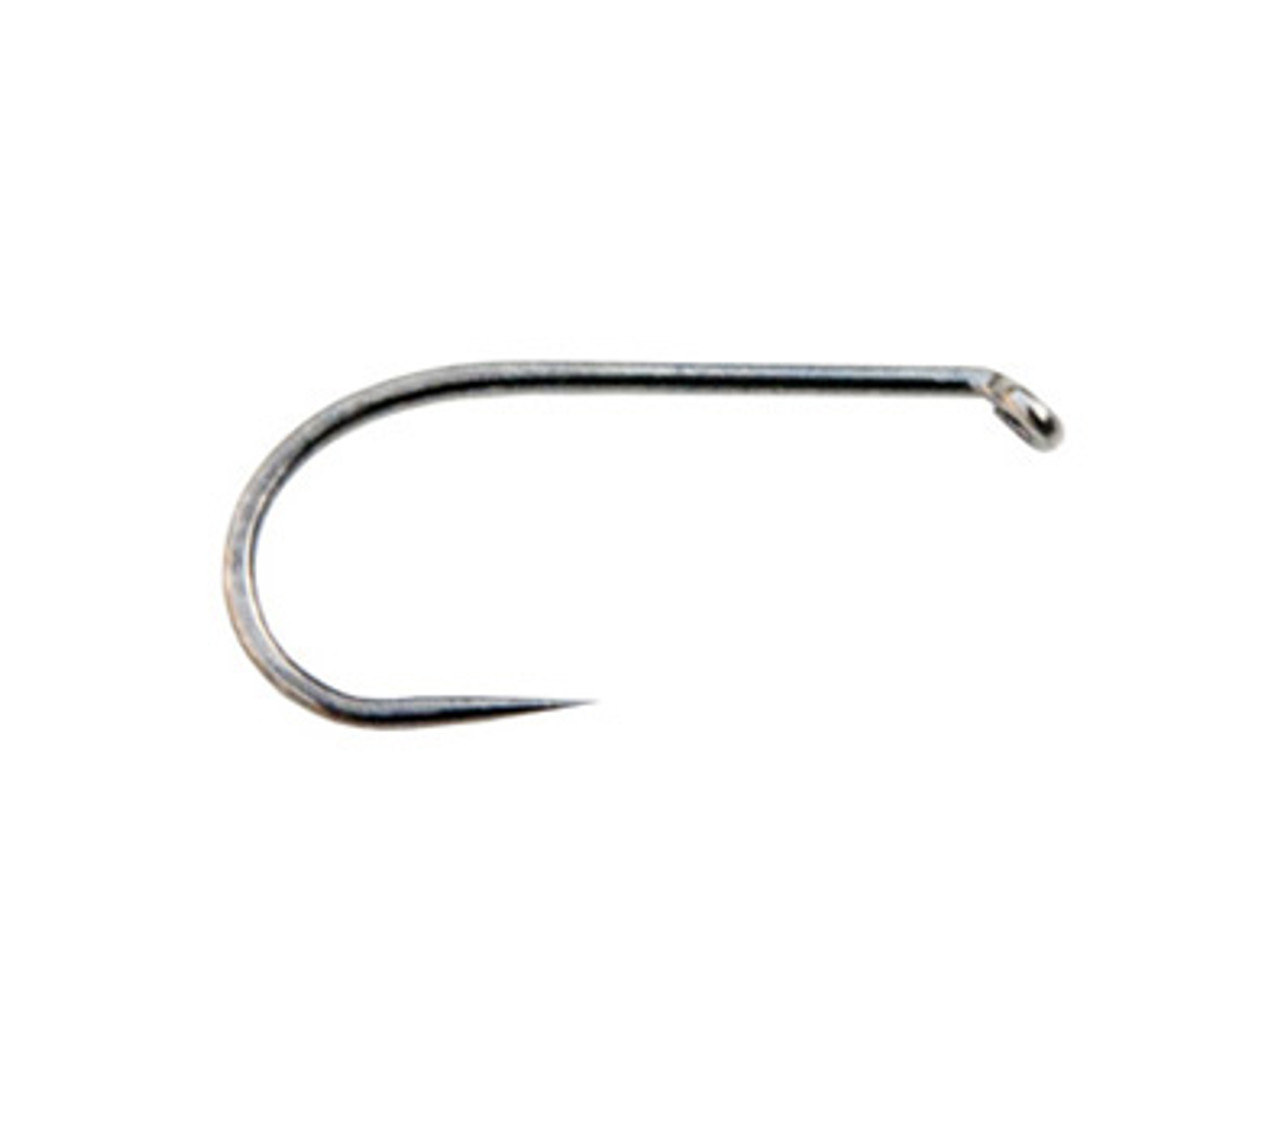 While not in the least bit sexy, fly fishing hooks are vitally